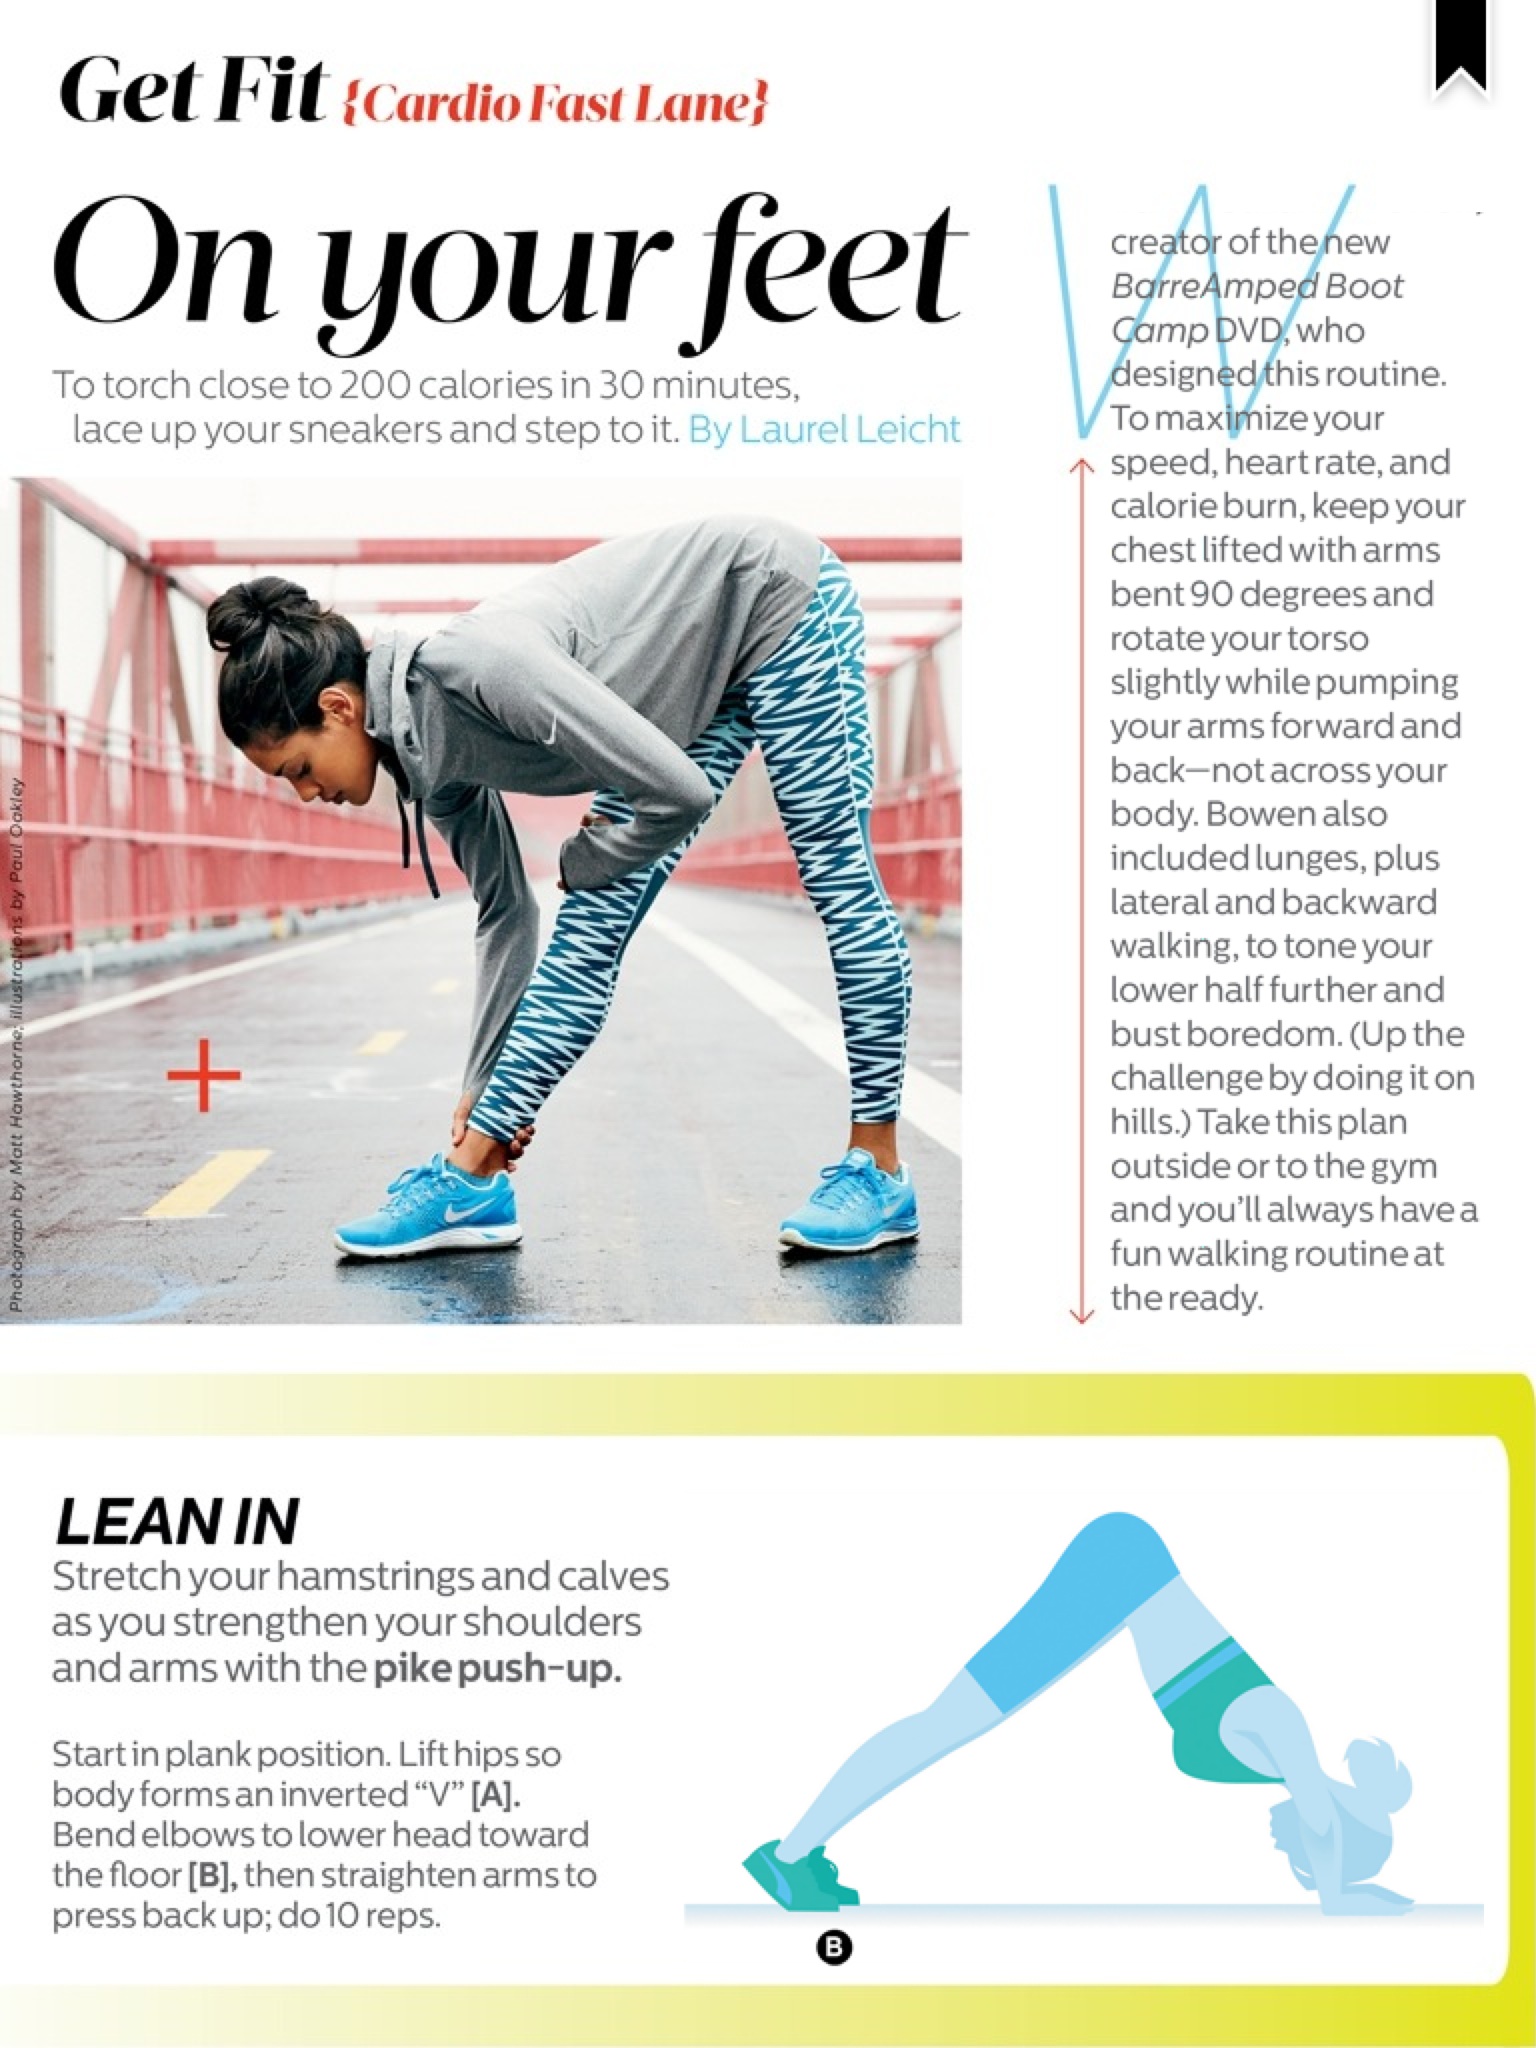 BarreAmped featured in Shape Magazine